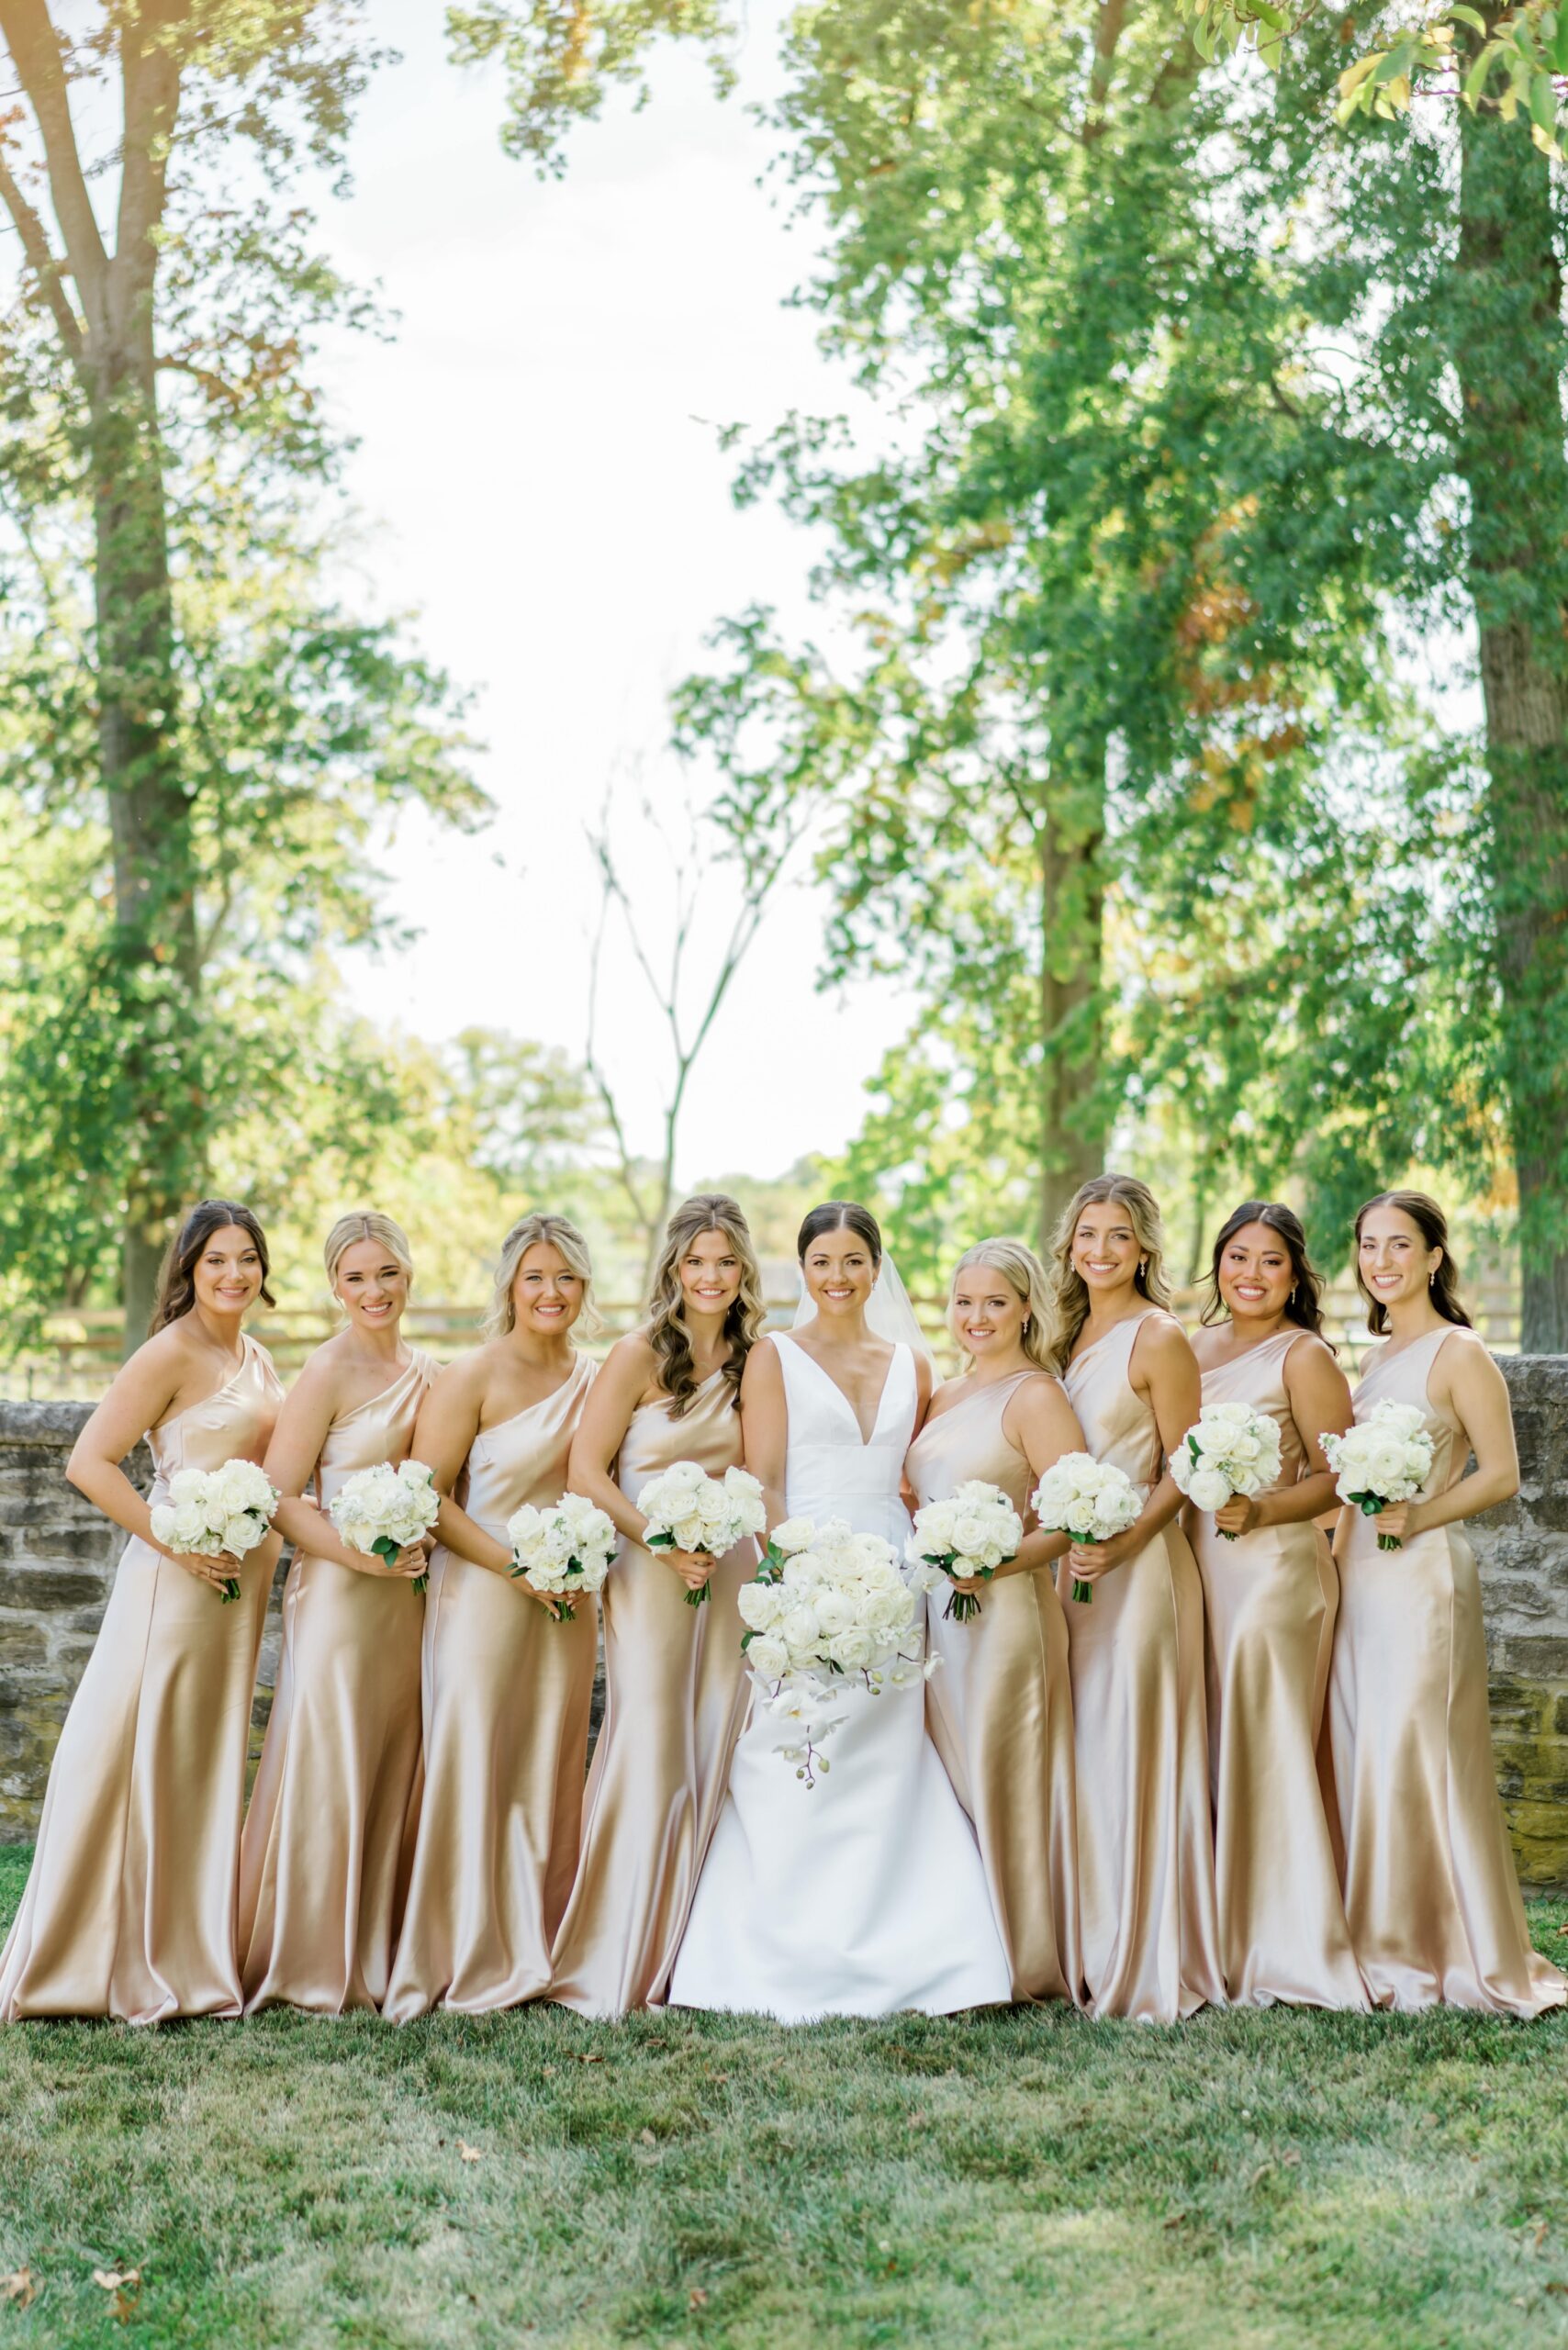 Bride with bridesmaids in champagne bridesmaids dresses